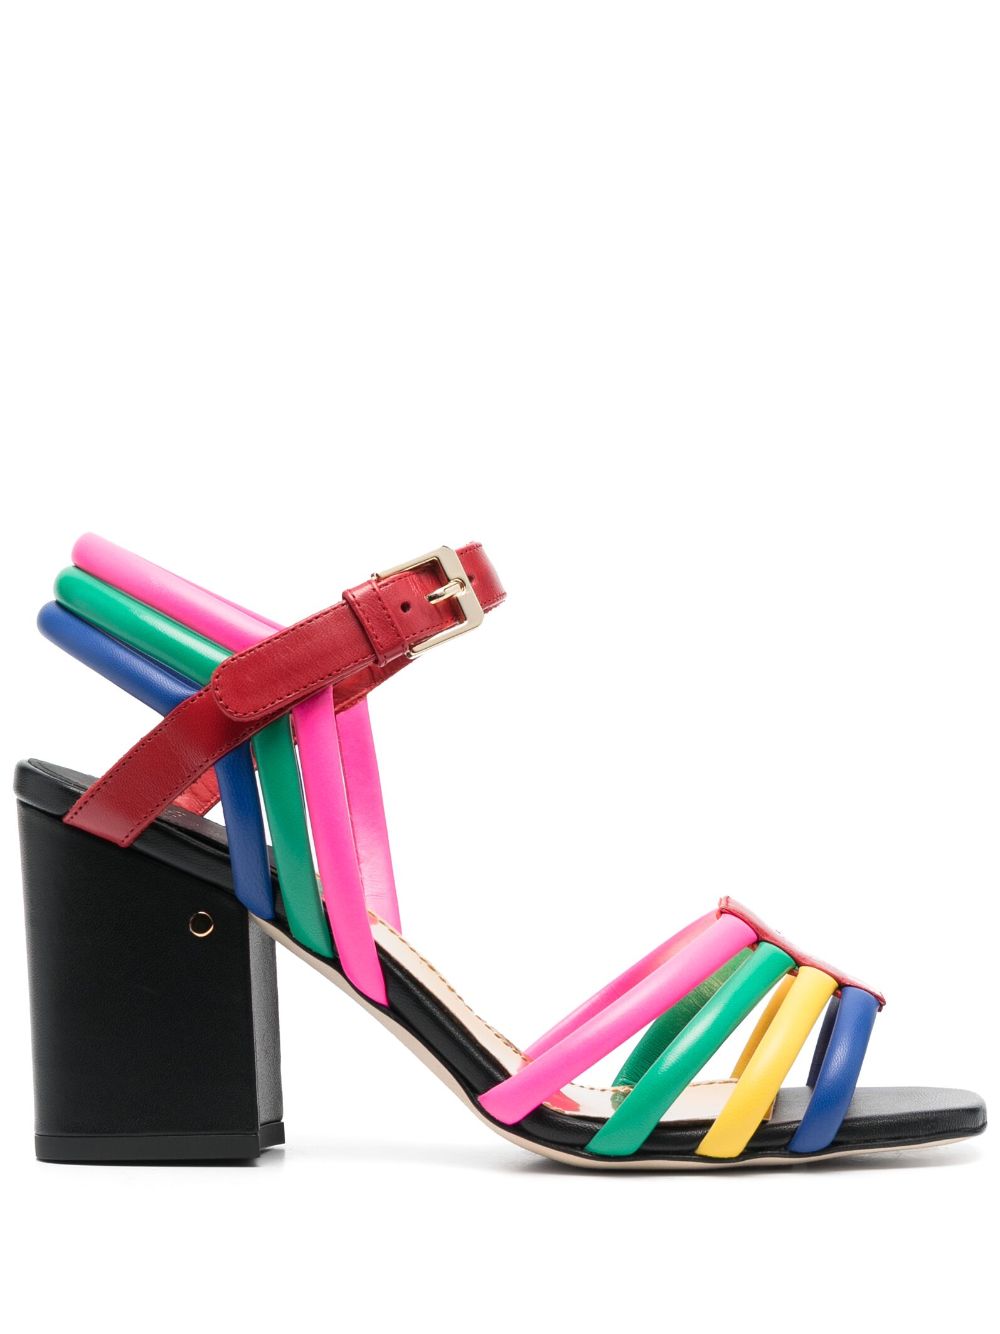 Laurence Dacade Camila 90mm leather sandals